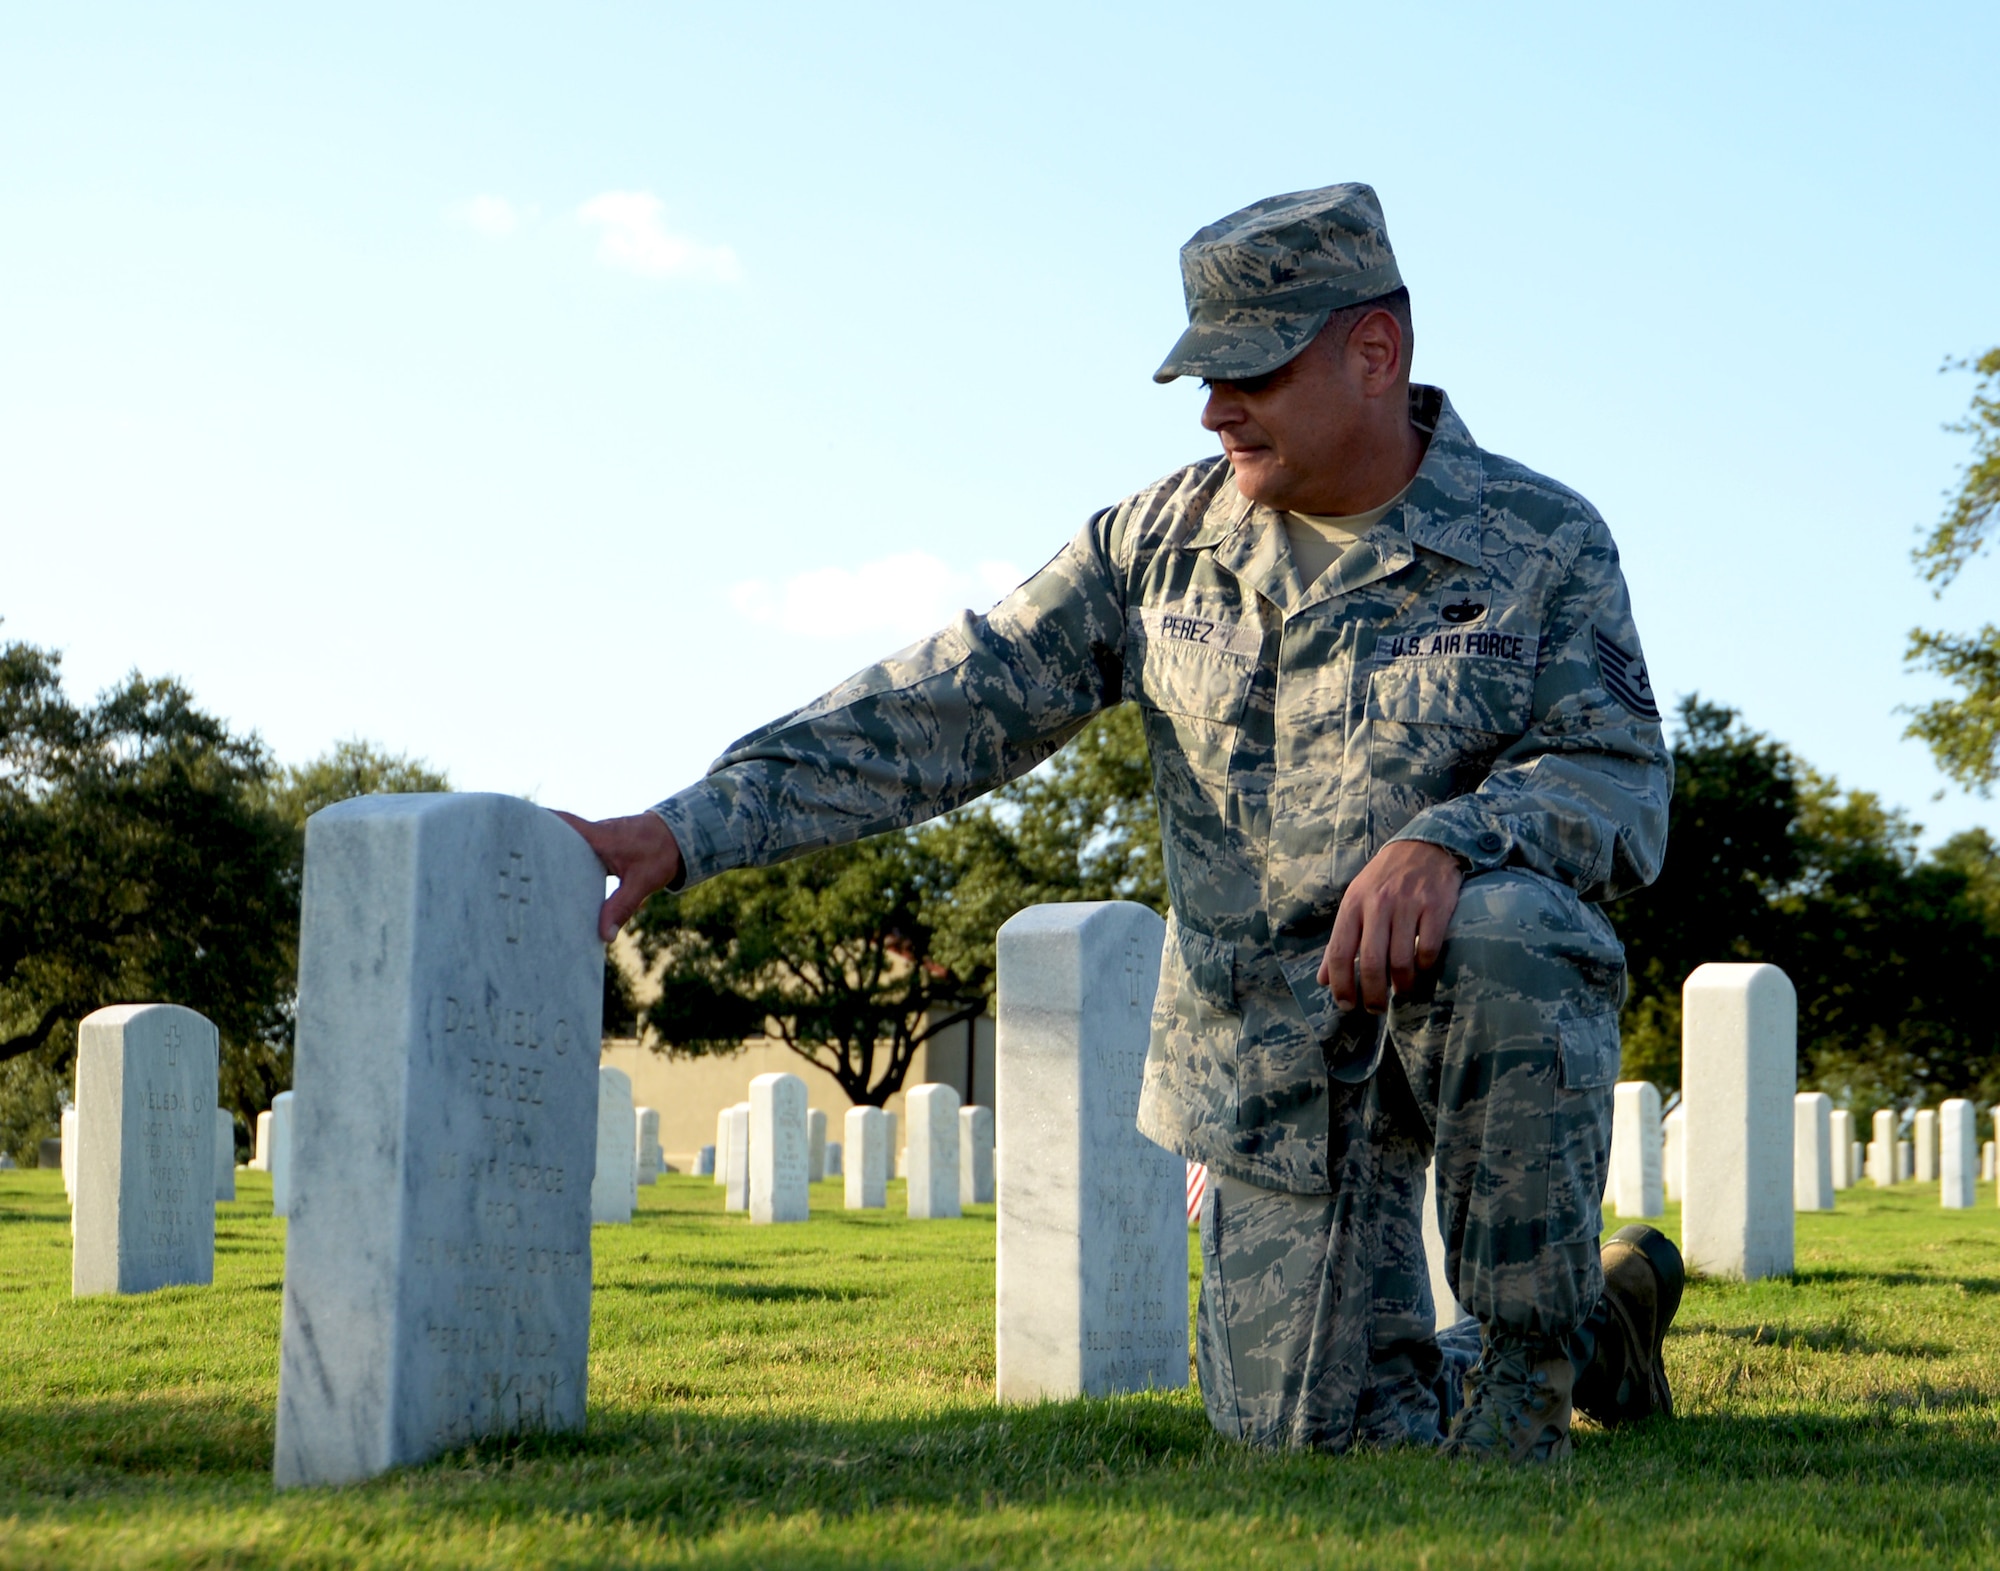 Tech. Sgt. Joseph Perez, 26th Aerial Port Squadron ramp services supervisor, visits the grave of his father Sept. 25, 2020, at Fort Sam Houston Cemetery, San Antonio, Texas. (U.S. Air Force photo by Tech. Sgt. Samantha Mathison)